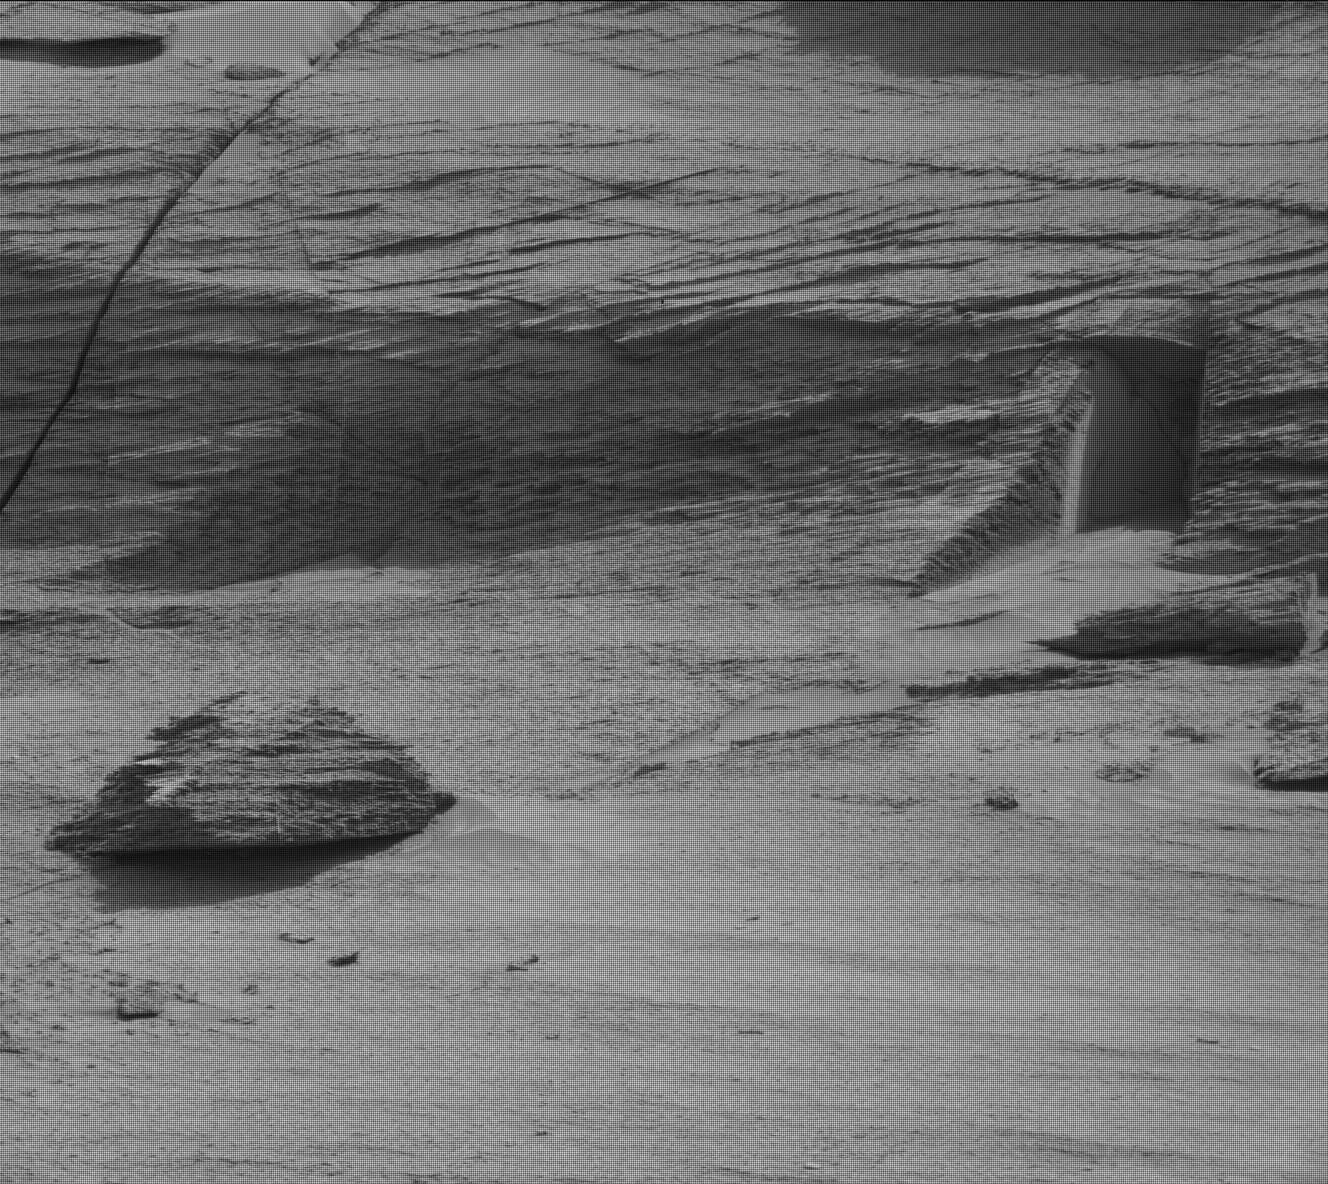 Photo of the day: Curiosity rover discovers mysterious hole in Martian rock